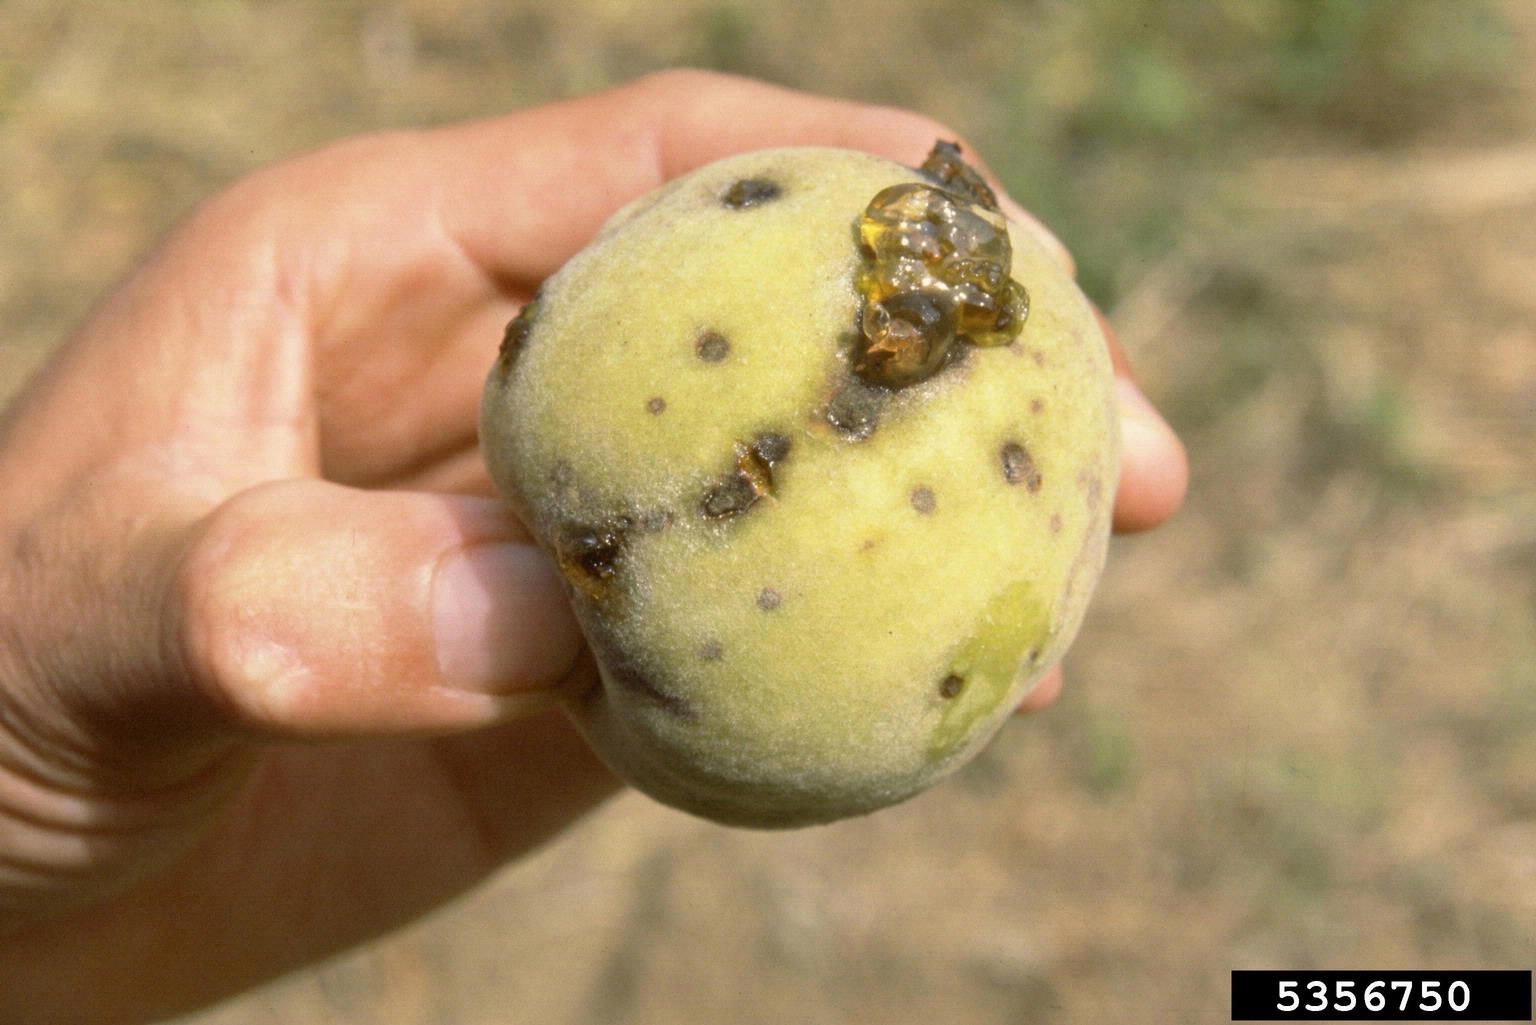 1546481309 what causes peach shot hole disease tips for treating peach shot hole disease takeseeds com - What Causes Peach Shot Hole Disease-- Tips For Treating Peach Shot Hole Disease|TakeSeeds.com